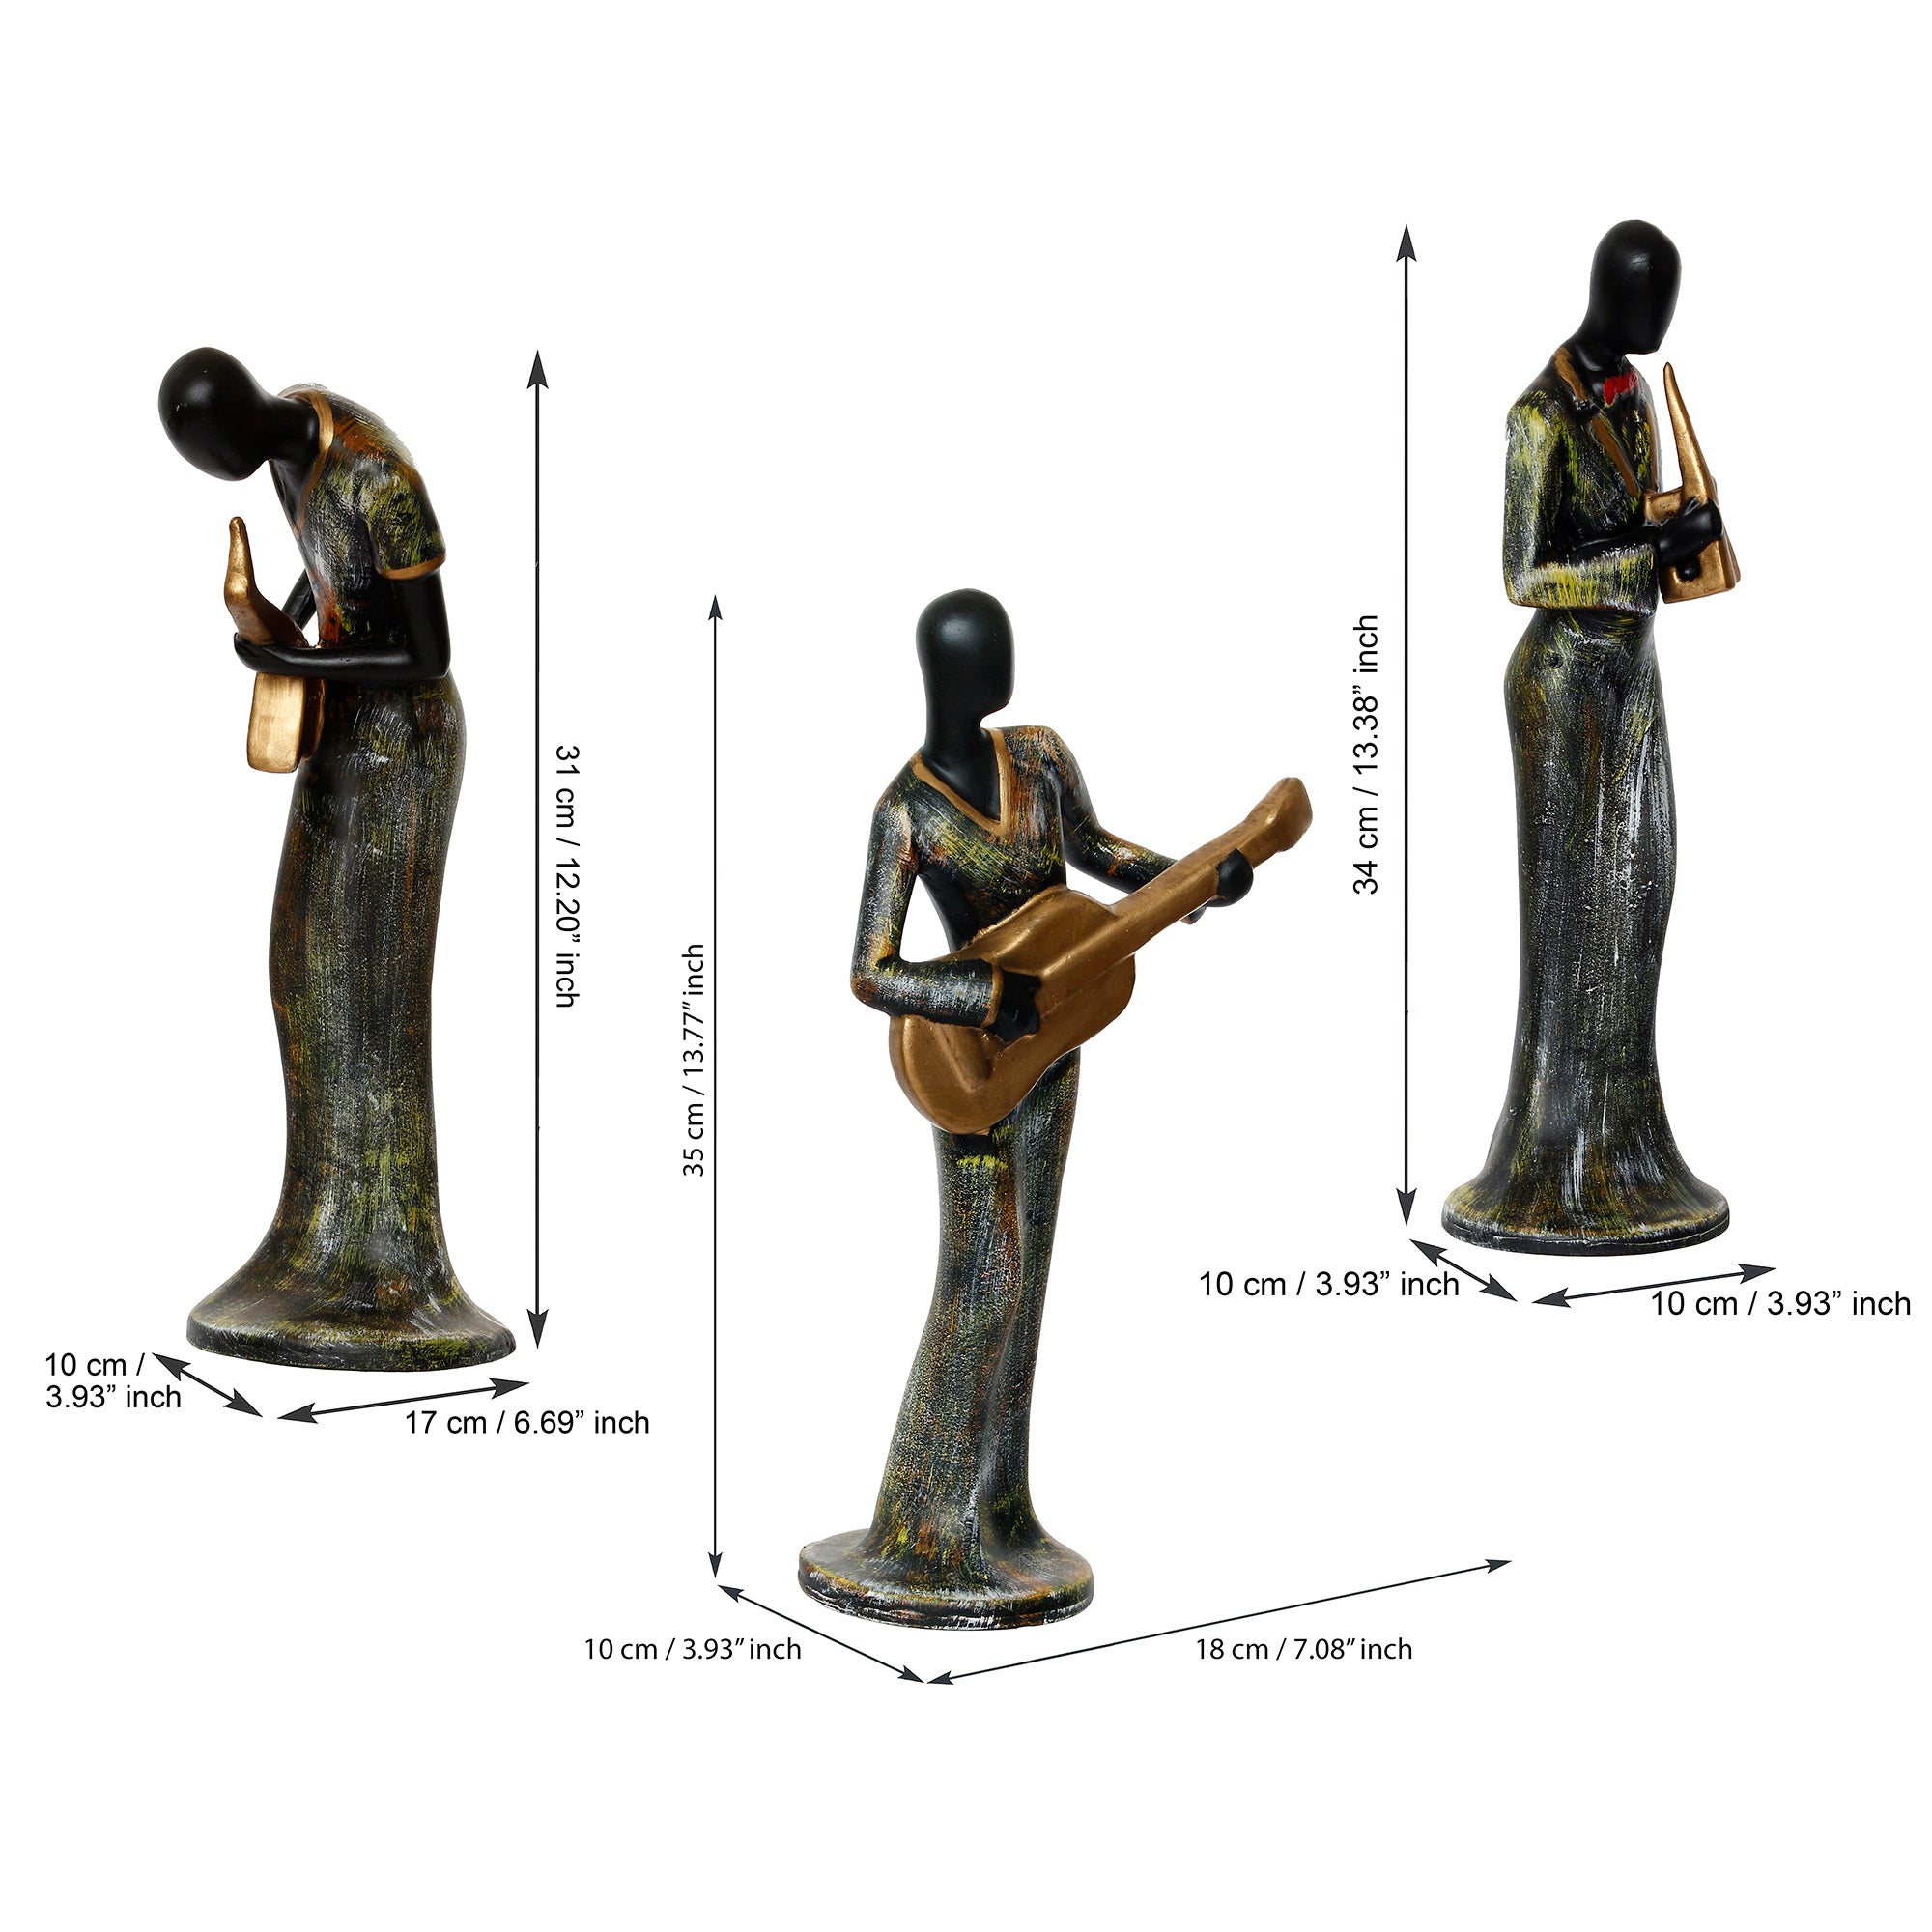 Grey and Black Polyresin Set of 3 Ladies figurines Playing Wind, Guitar,Saxophone Musical Instrument Handcrafted Decorative Showpiece 3